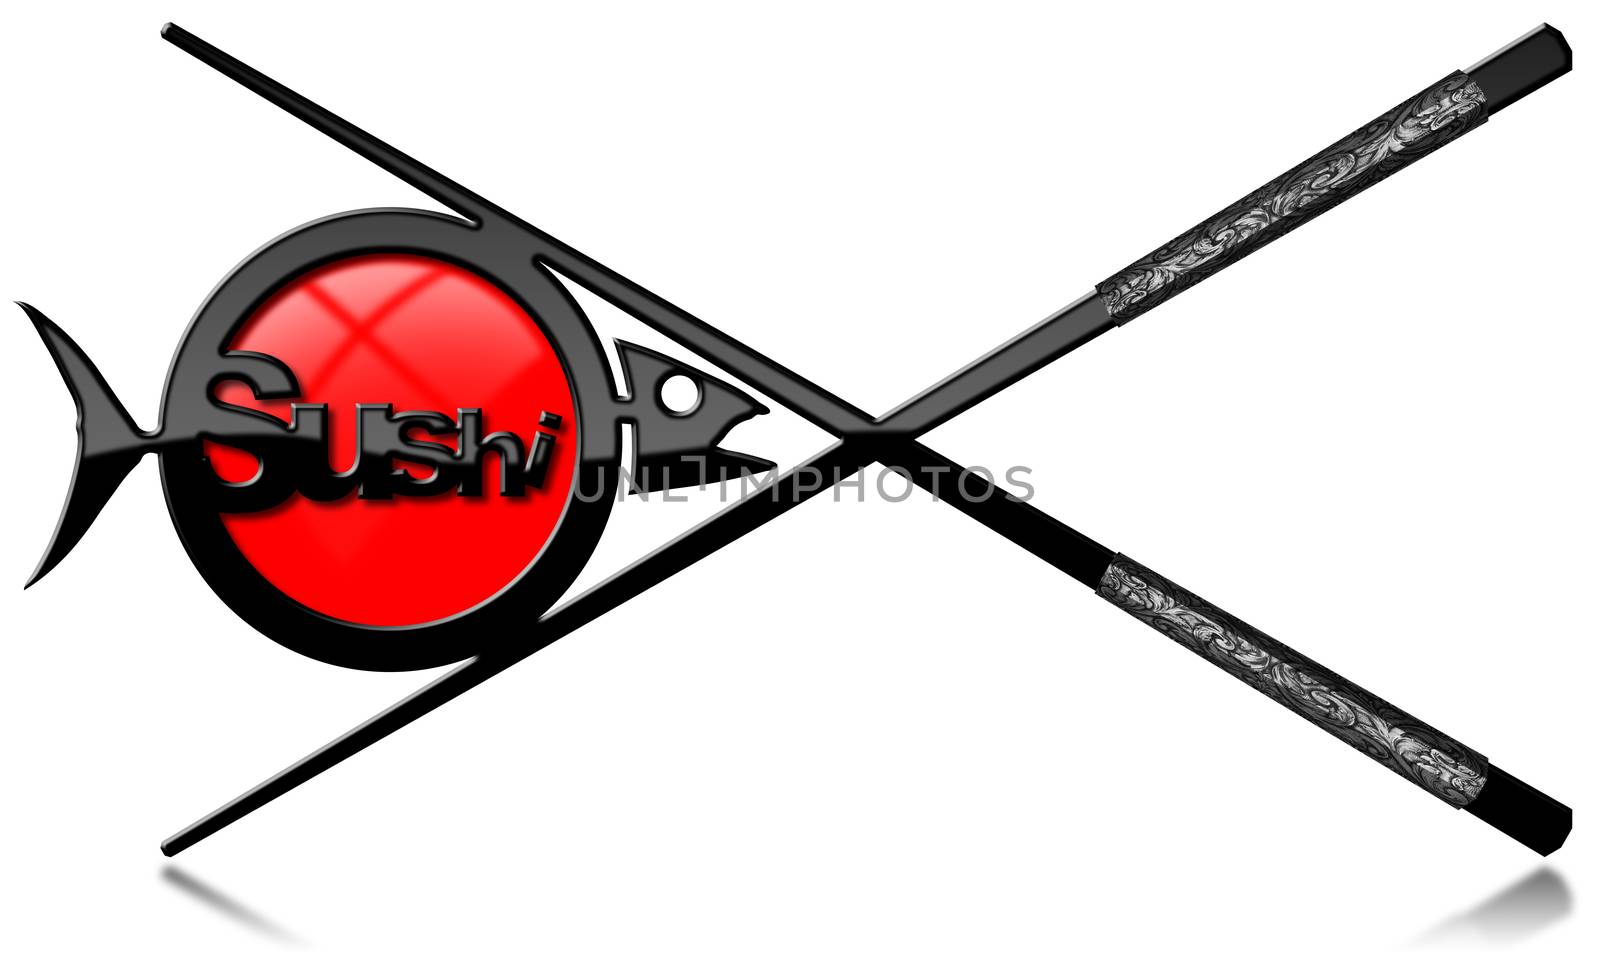 Red, black and silver symbol in the shape of a fish with chopsticks and text Sushi. Isolated on white background